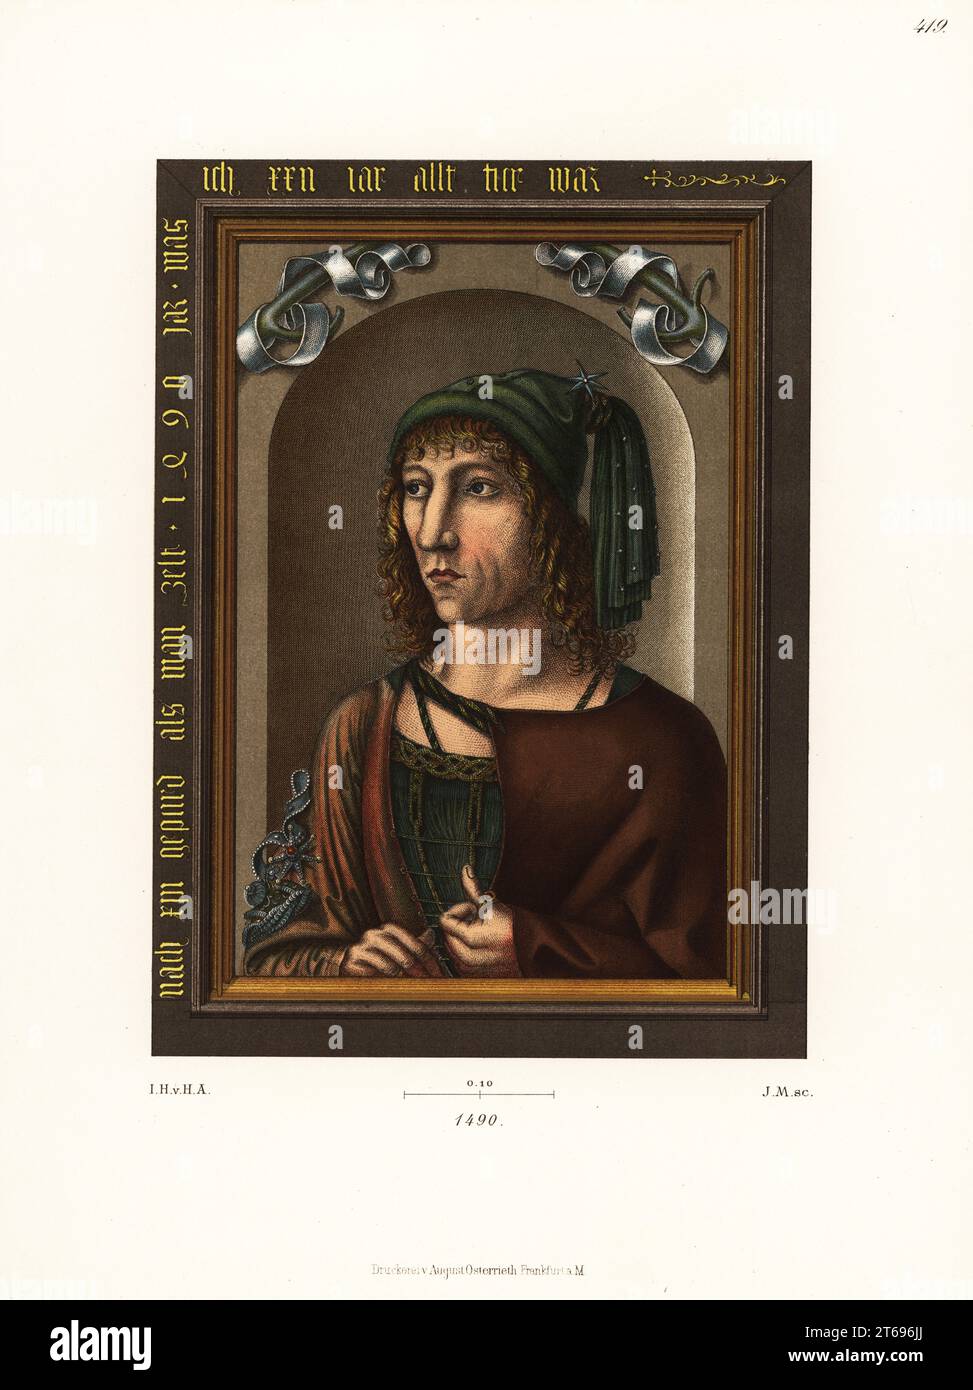 Portrait of a 22-year-old German nobleman in oils from 1490. Painted by the famous master of the Swabian school Bartholomaus Zeitblom. Chromolithograph from Hefner-Alteneck's Costumes, Artworks and Appliances from the Middle Ages to the 17th Century, Frankfurt, 1889. Illustration by Dr. Jakob Heinrich von Hefner-Alteneck, lithographed by J.M. Dr. Hefner-Alteneck (1811 - 1903) was a German museum curator, archaeologist, art historian, illustrator and etcher. Stock Photo